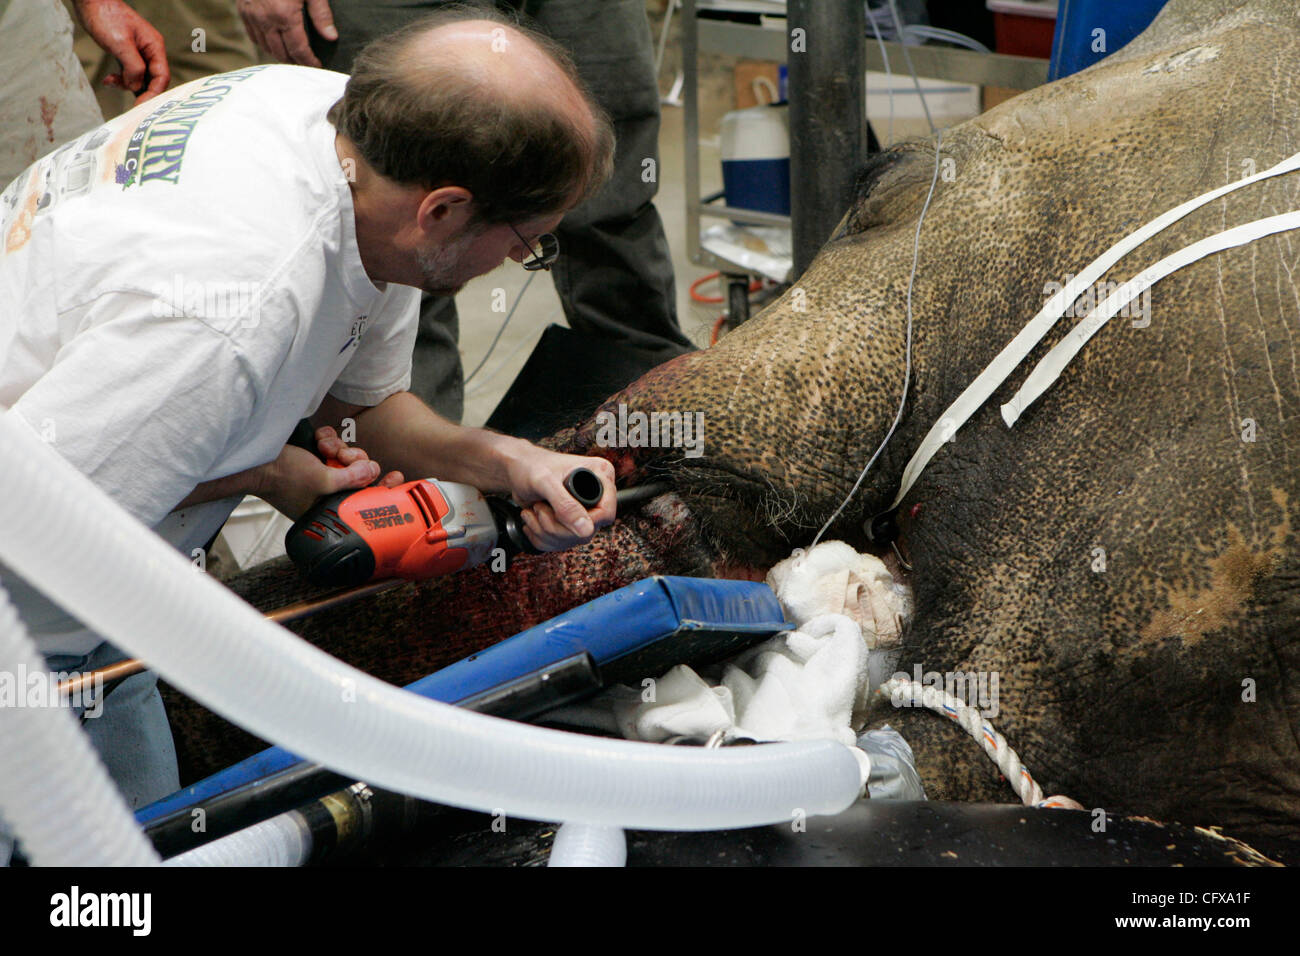 Apr 01, 2007 - Portland, Oregon - Dr. MITCH FINNEGAN, Oregon Zoo lead veterinarian, performs surgery to try to remove an infected tusk from Tusko the Asian elephant at the Oregon Zoo. The 6.75-ton, 35-year-old bull elephant had surgery in February to try to remove the chronically infected, broken le Stock Photo